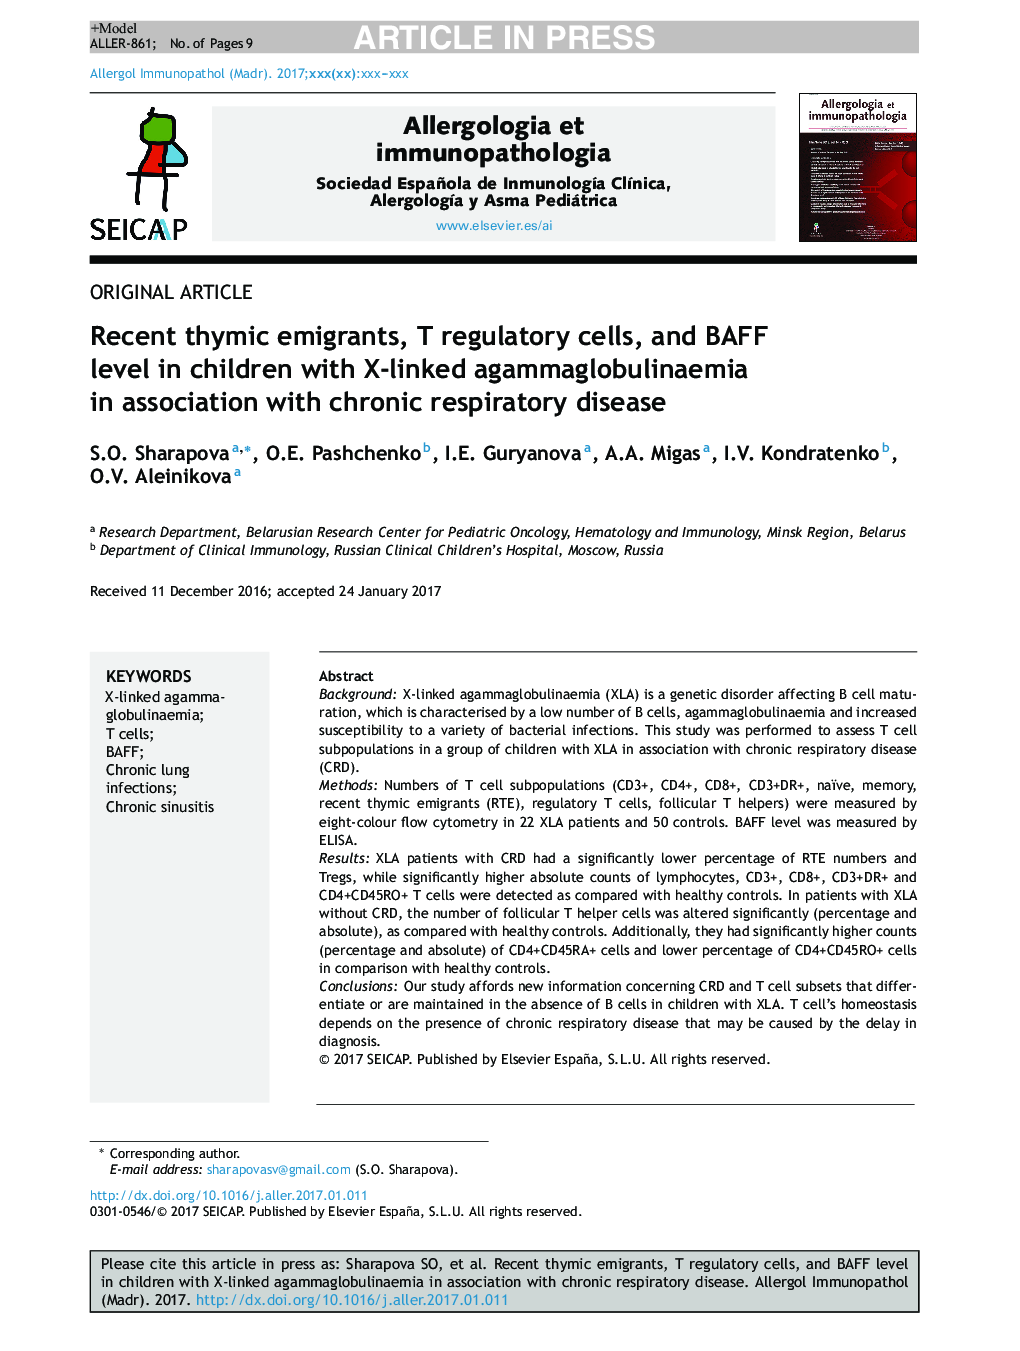 Recent thymic emigrants, T regulatory cells, and BAFF level in children with X-linked agammaglobulinaemia in association with chronic respiratory disease